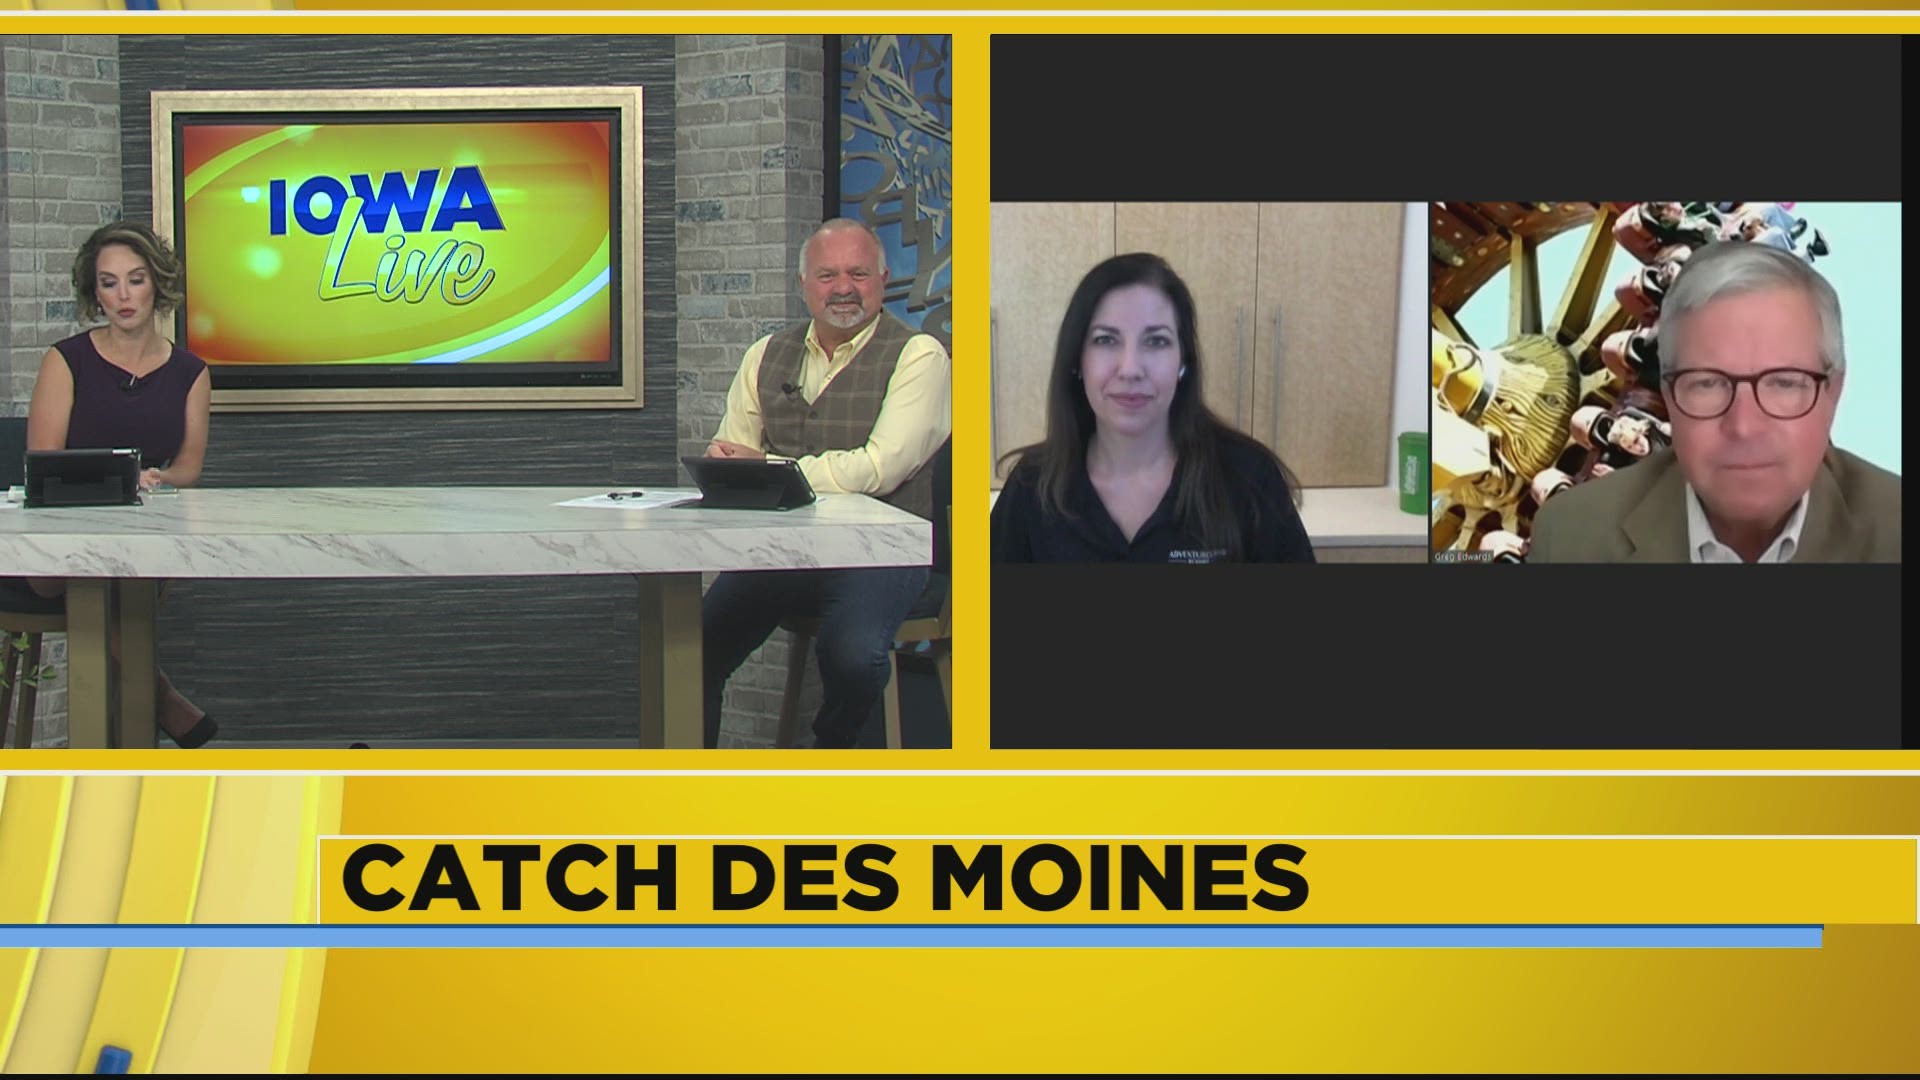 Lou and Jackie talk with Advenureland and Catch Des Moines this morning on 'Iowa Live'